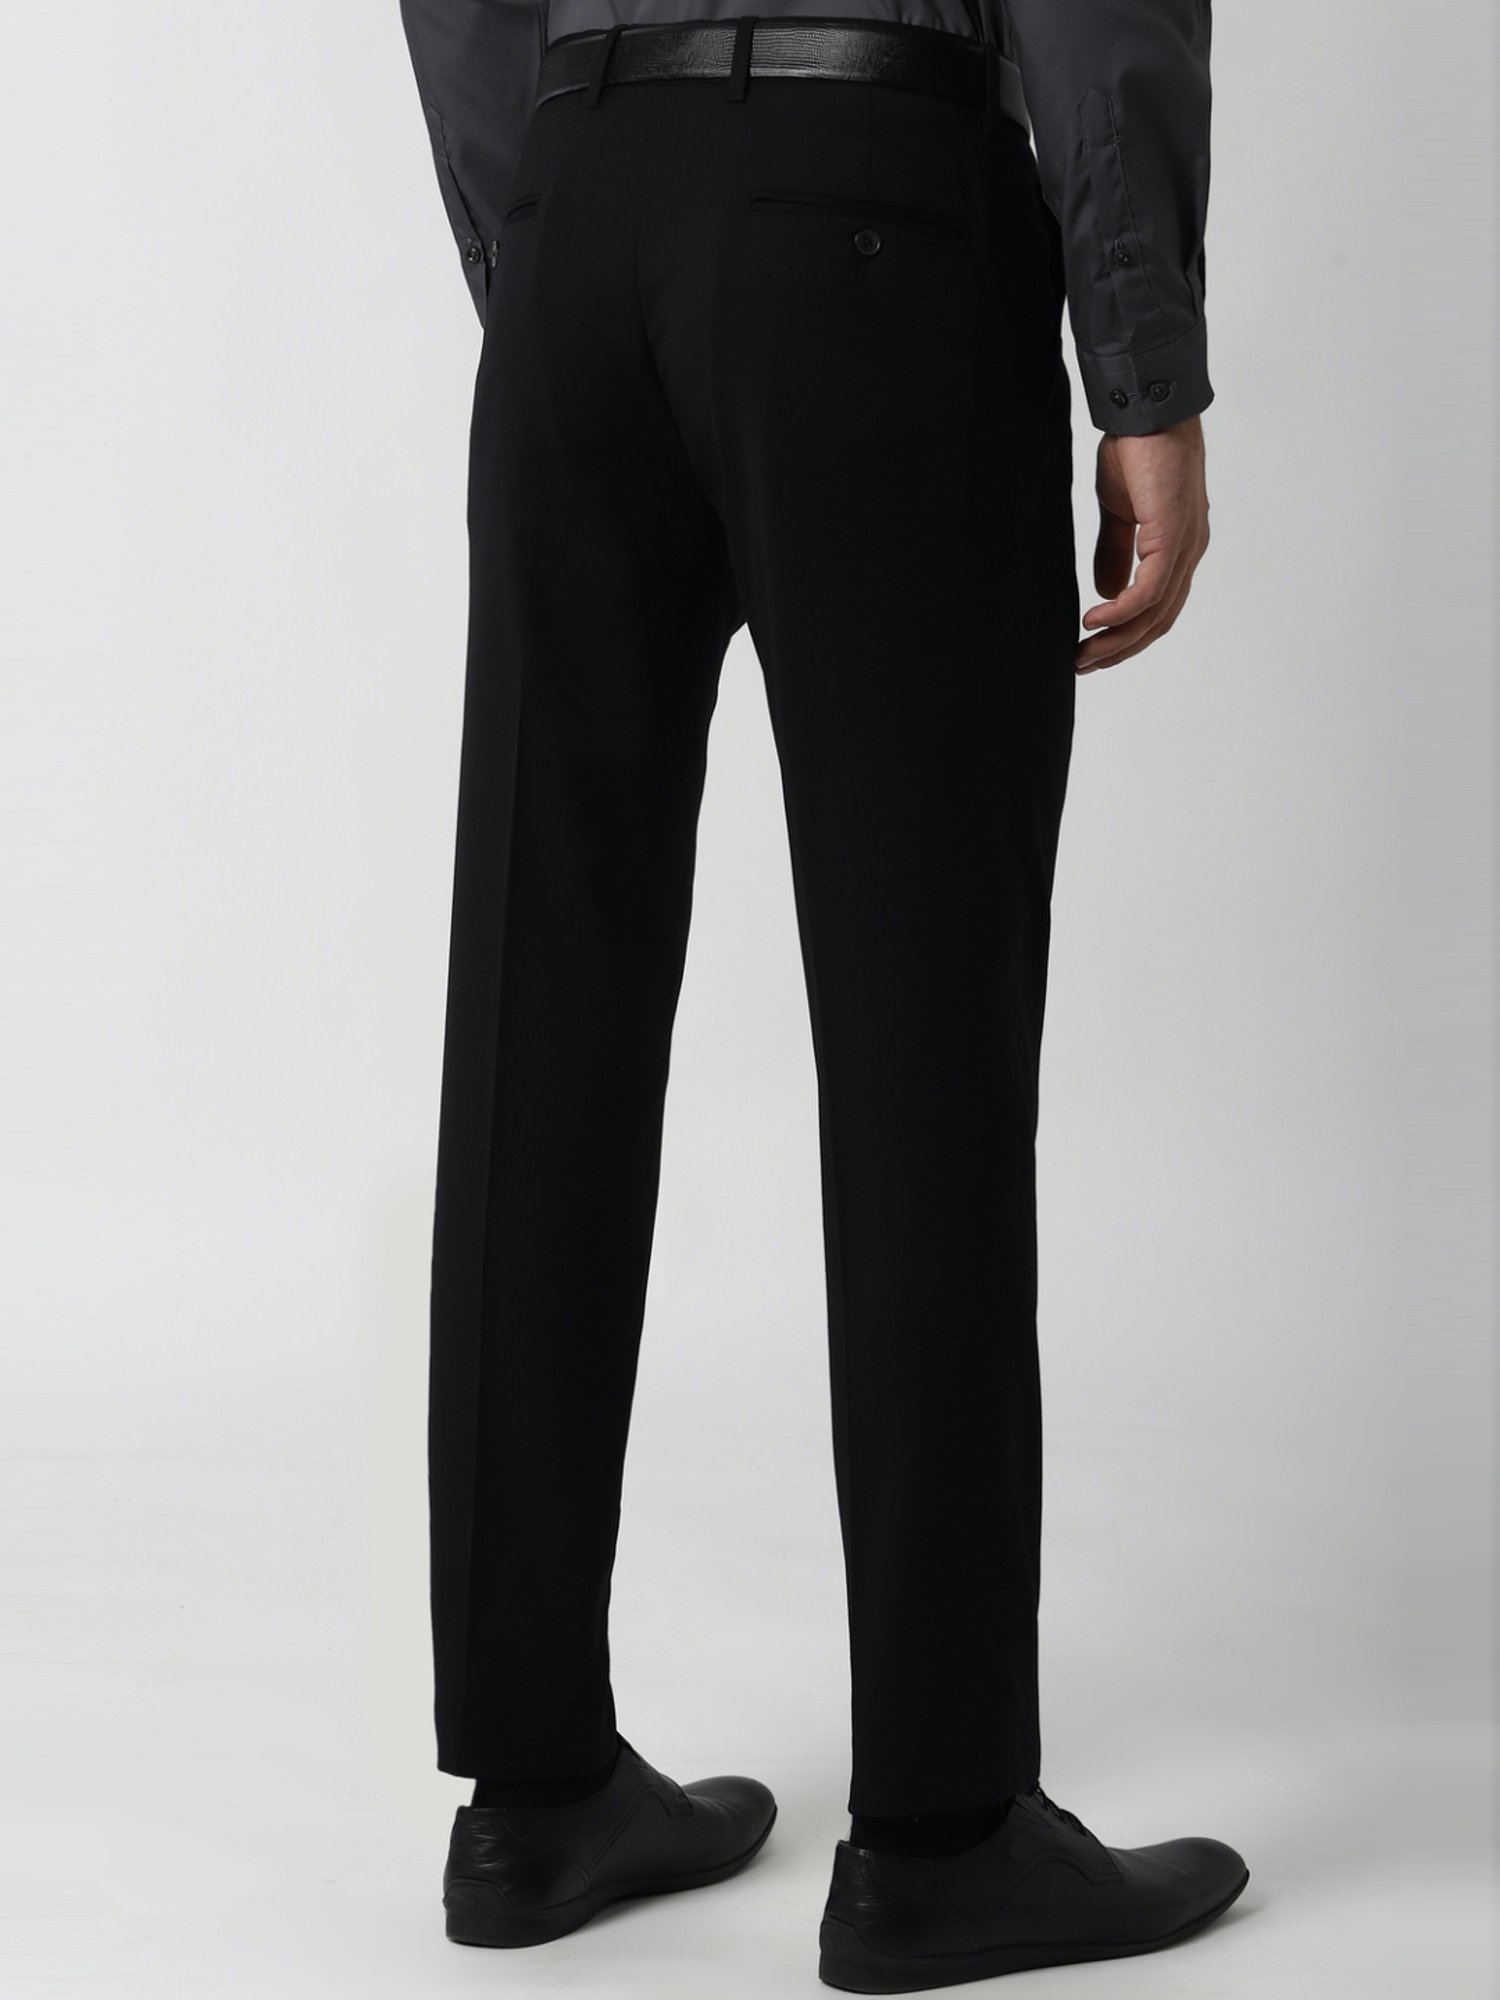 Buy Peter England Black Slim Fit Trousers for Mens Online @ Tata CLiQ